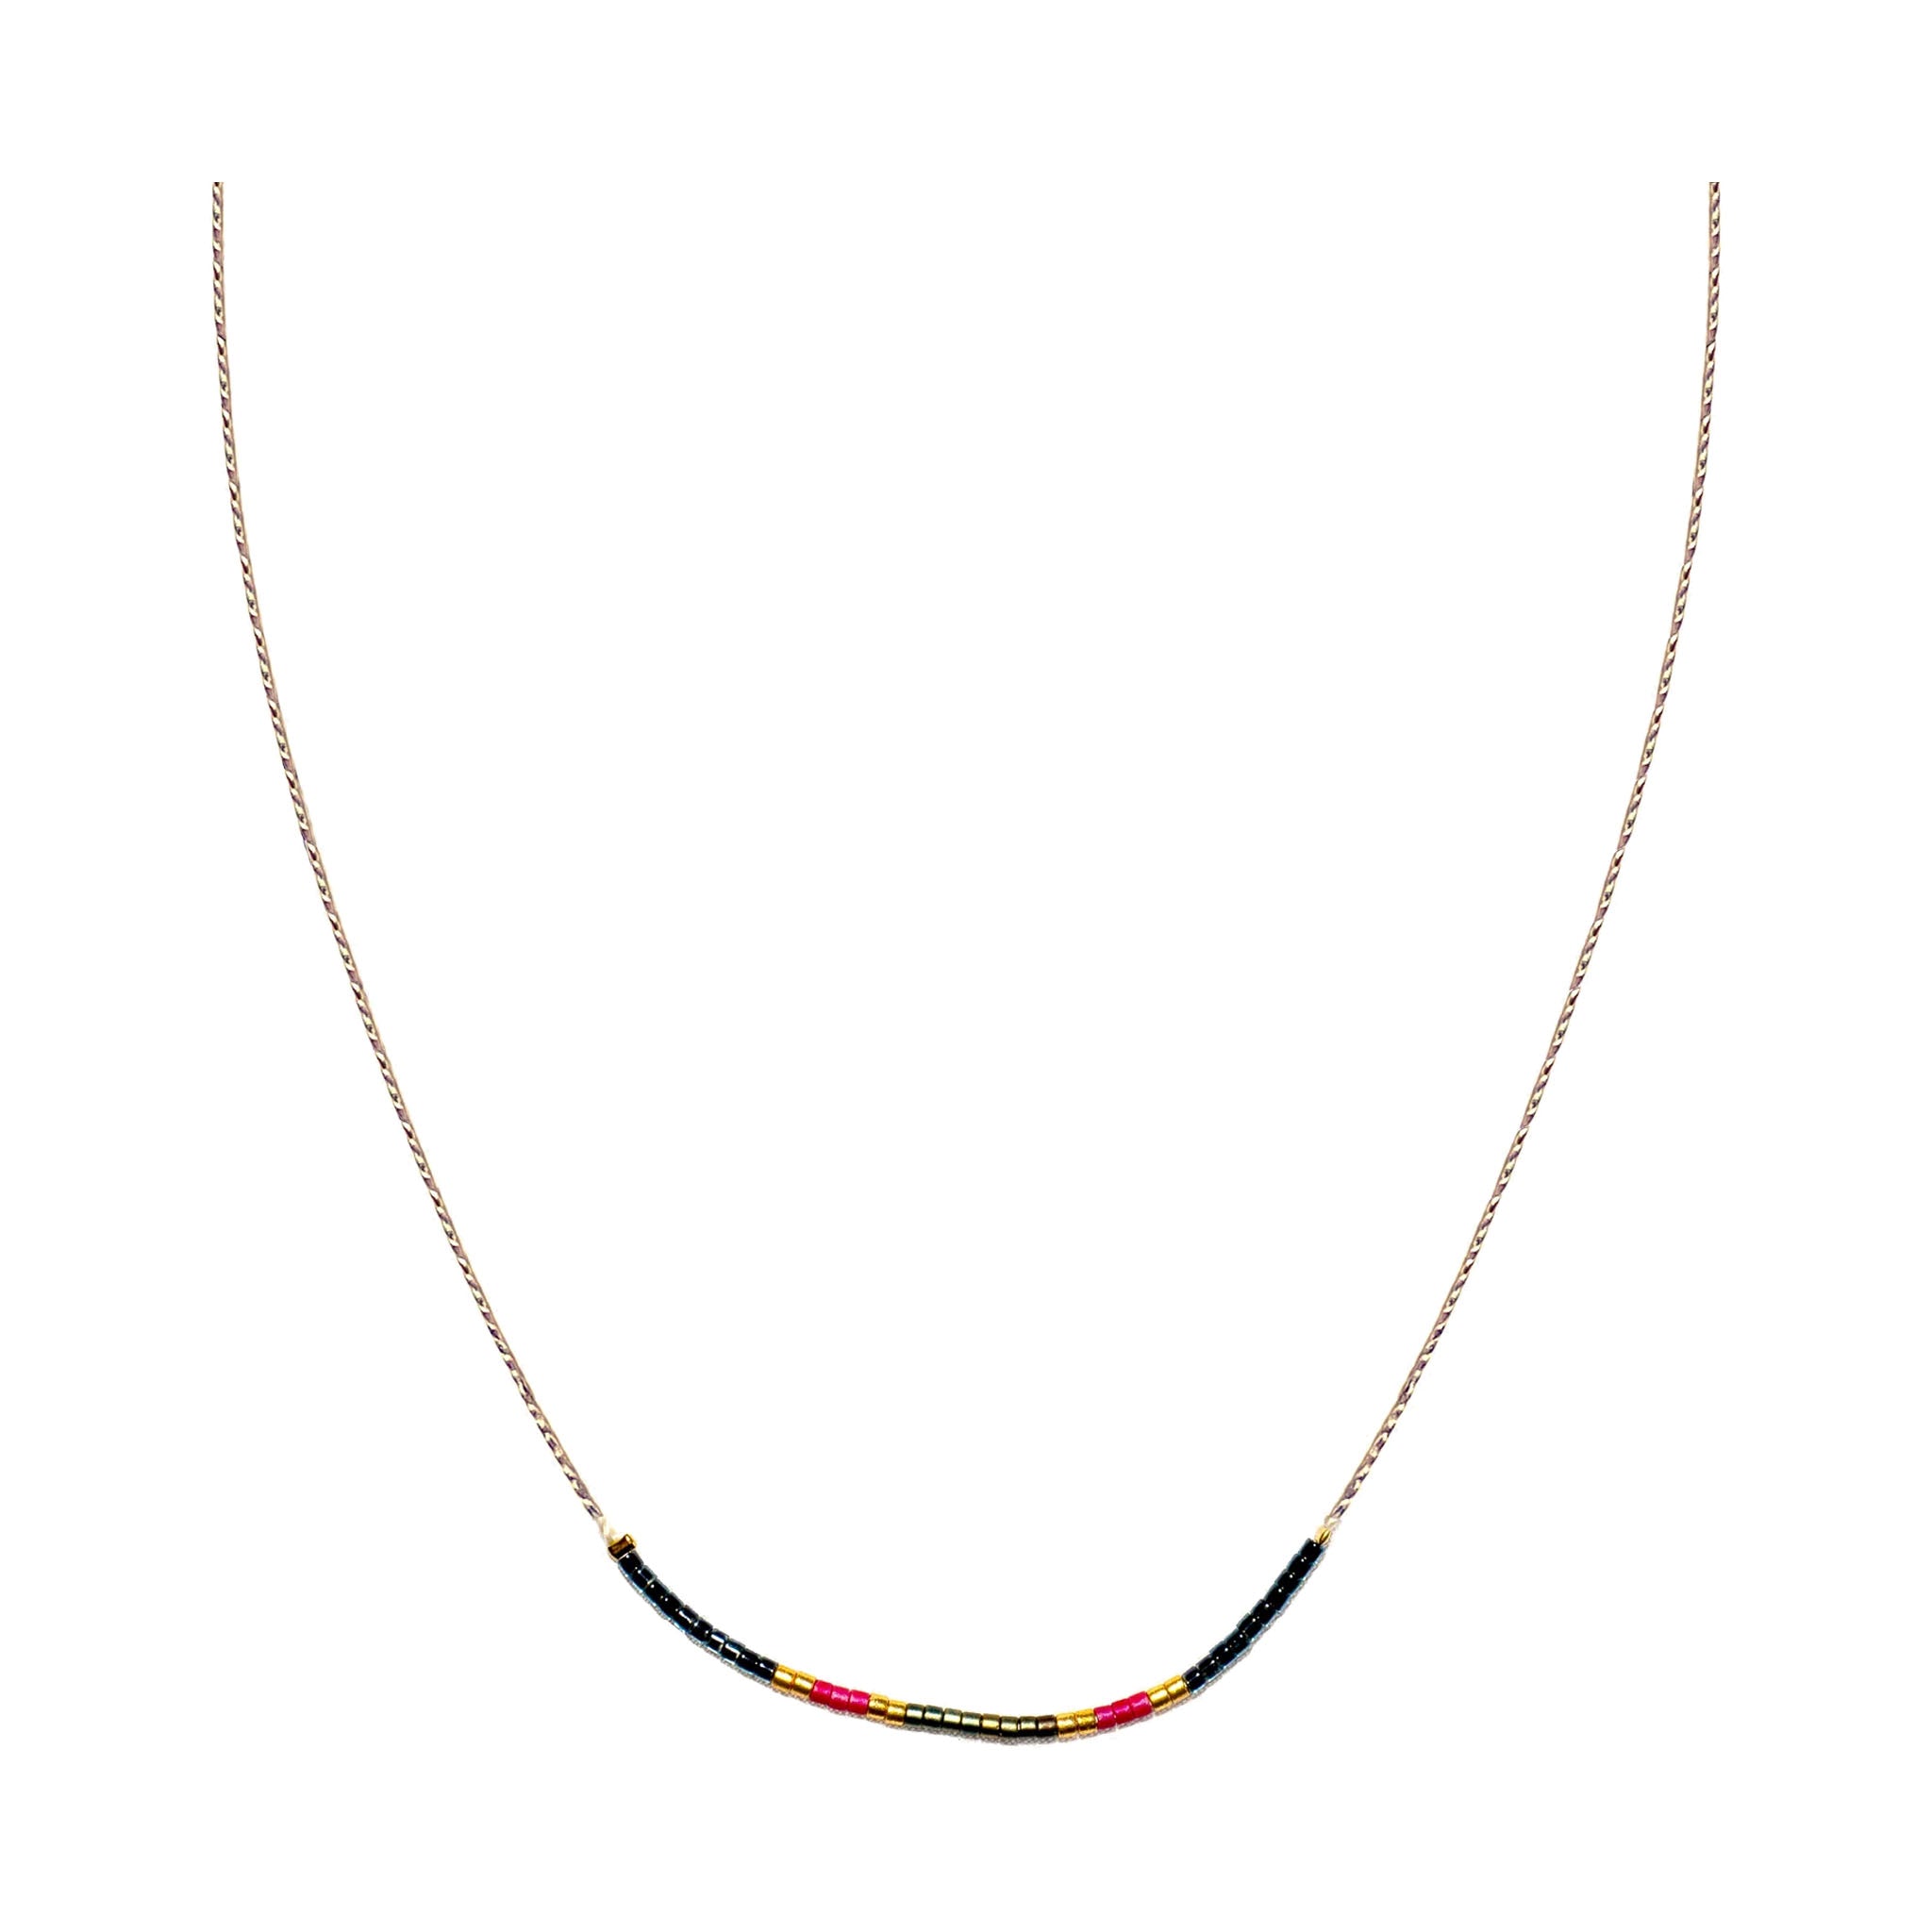 Intention Necklace - Night/Patina/Red